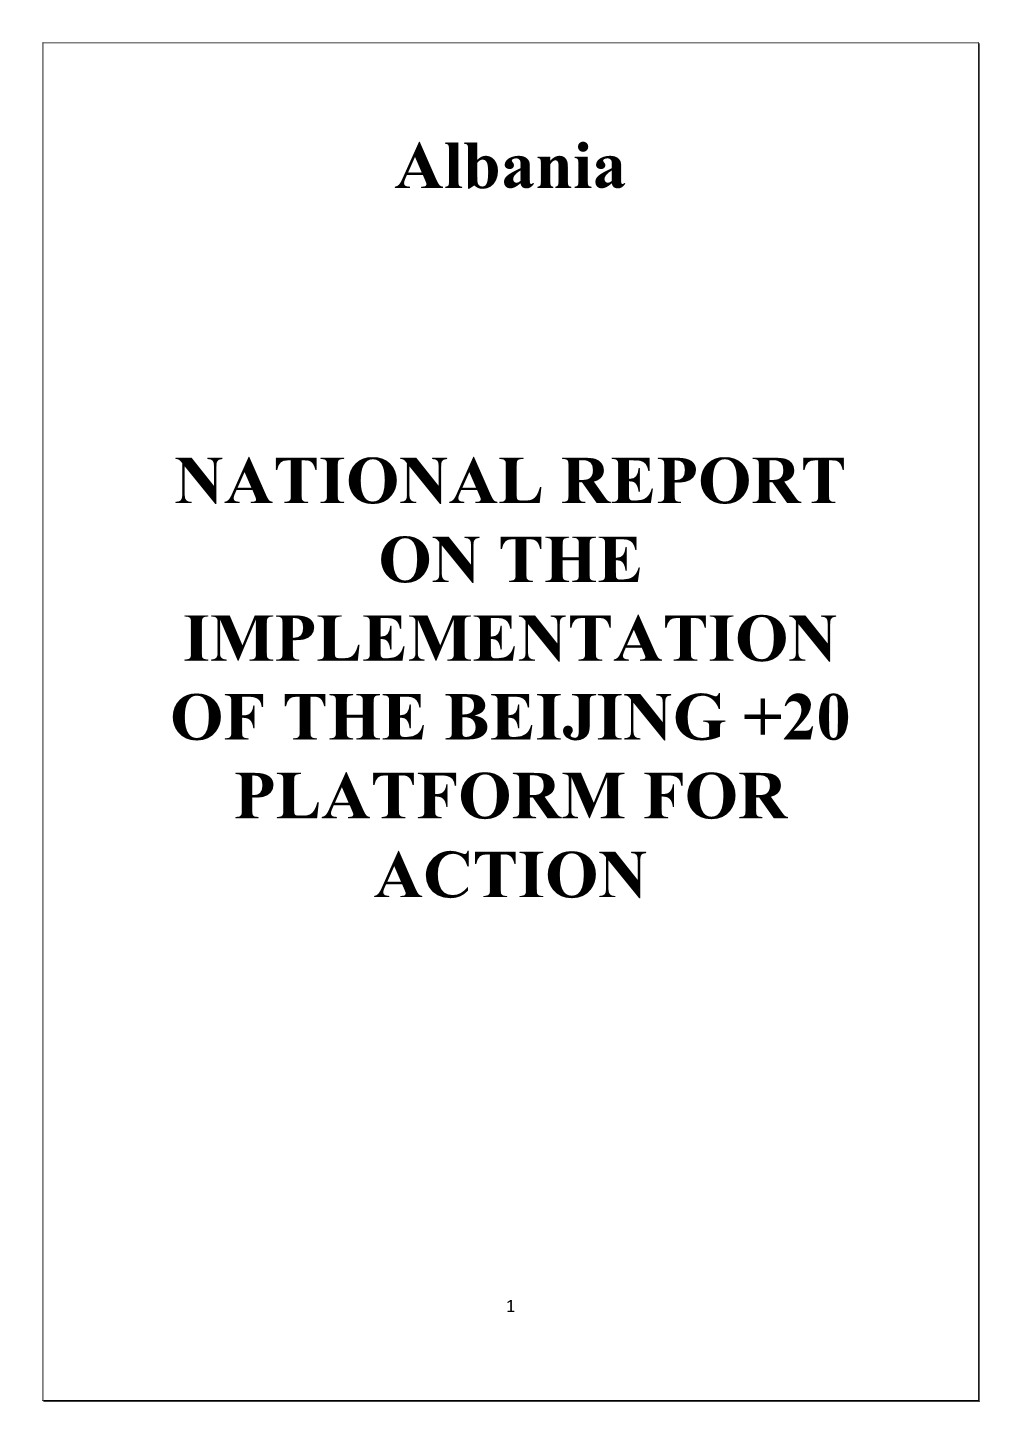 Albania NATIONAL REPORT on the IMPLEMENTATION of THE